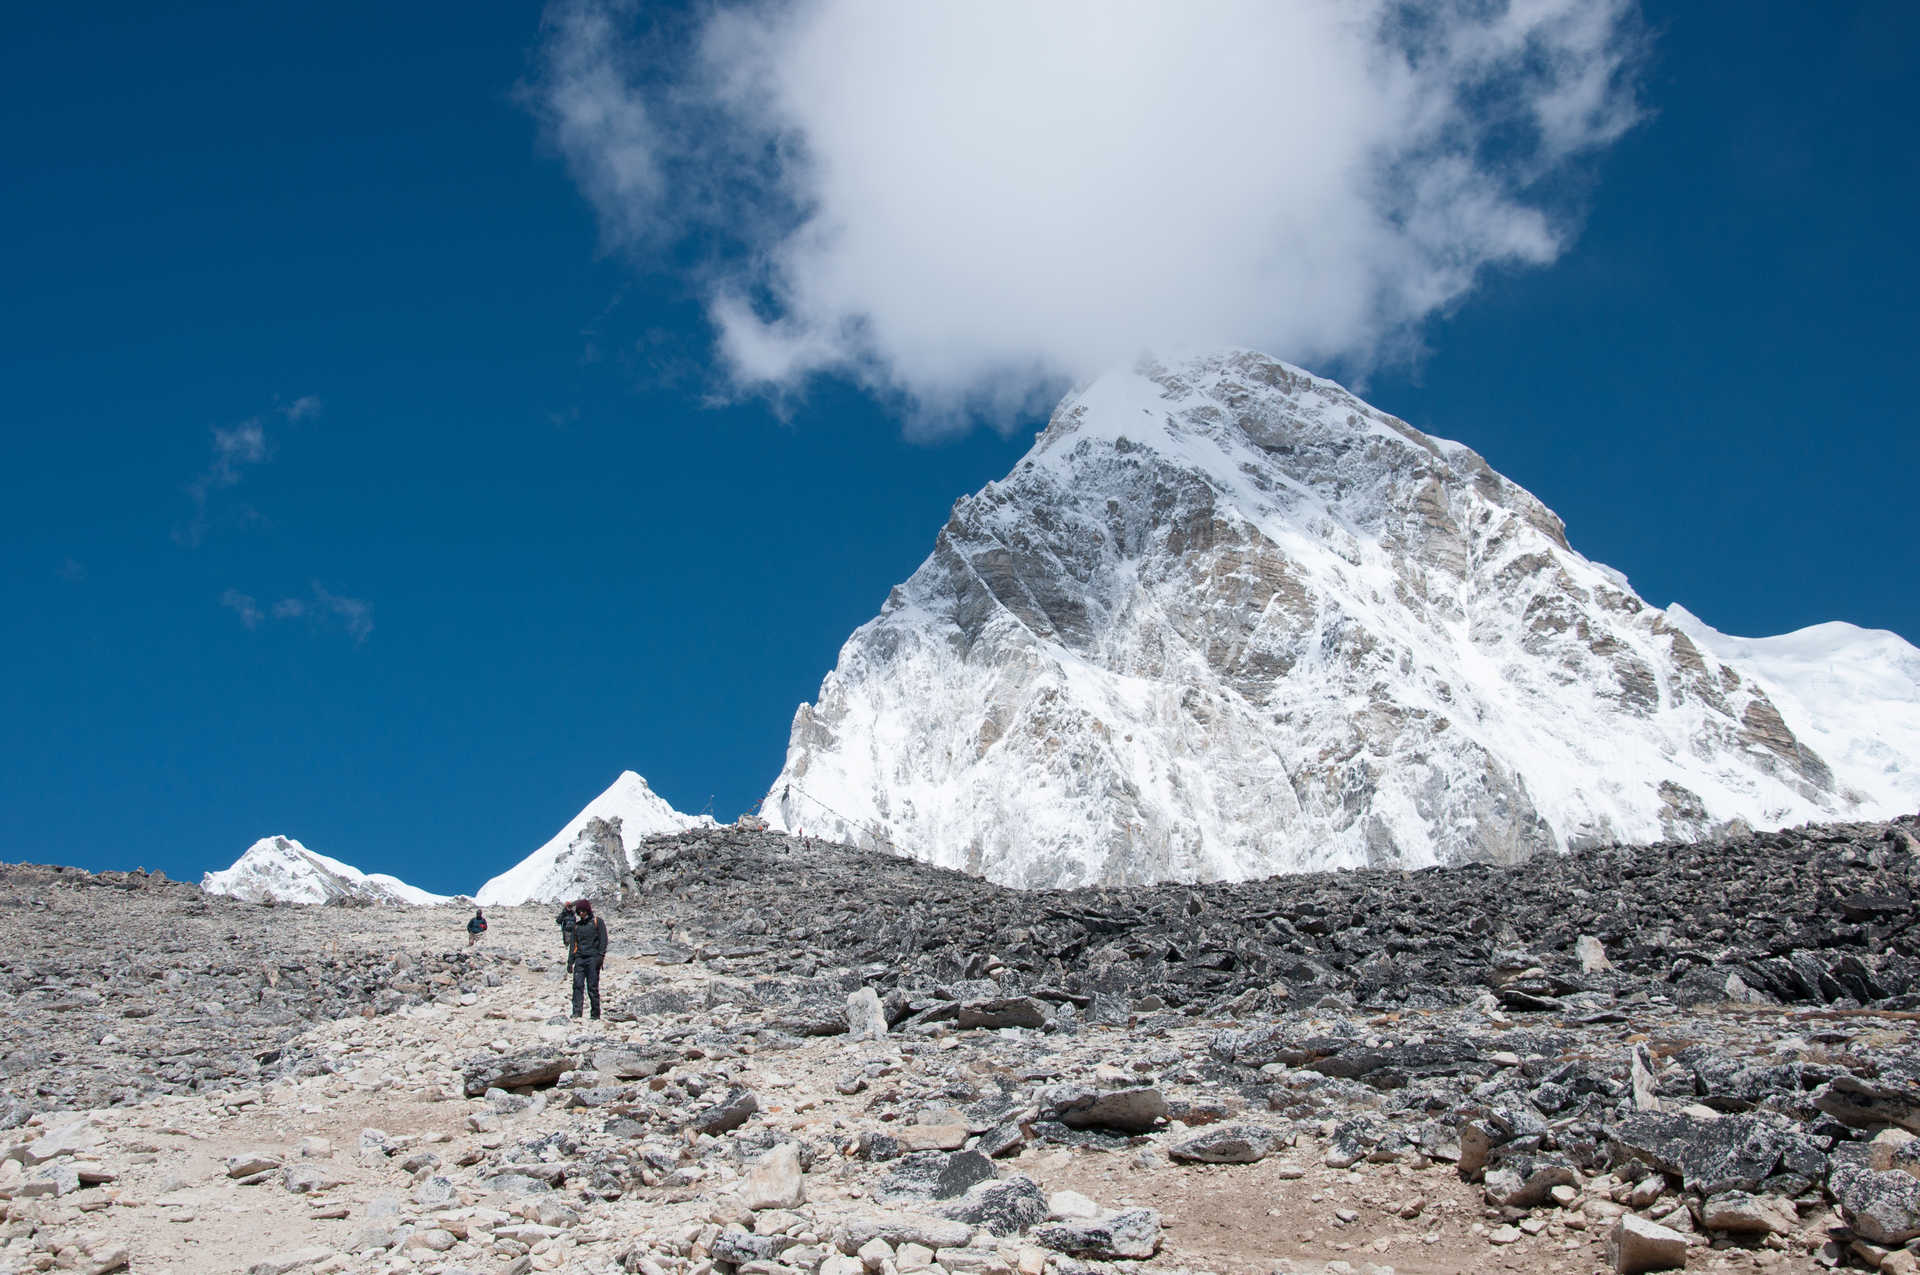 Distance from Everest Base Camp to Summit